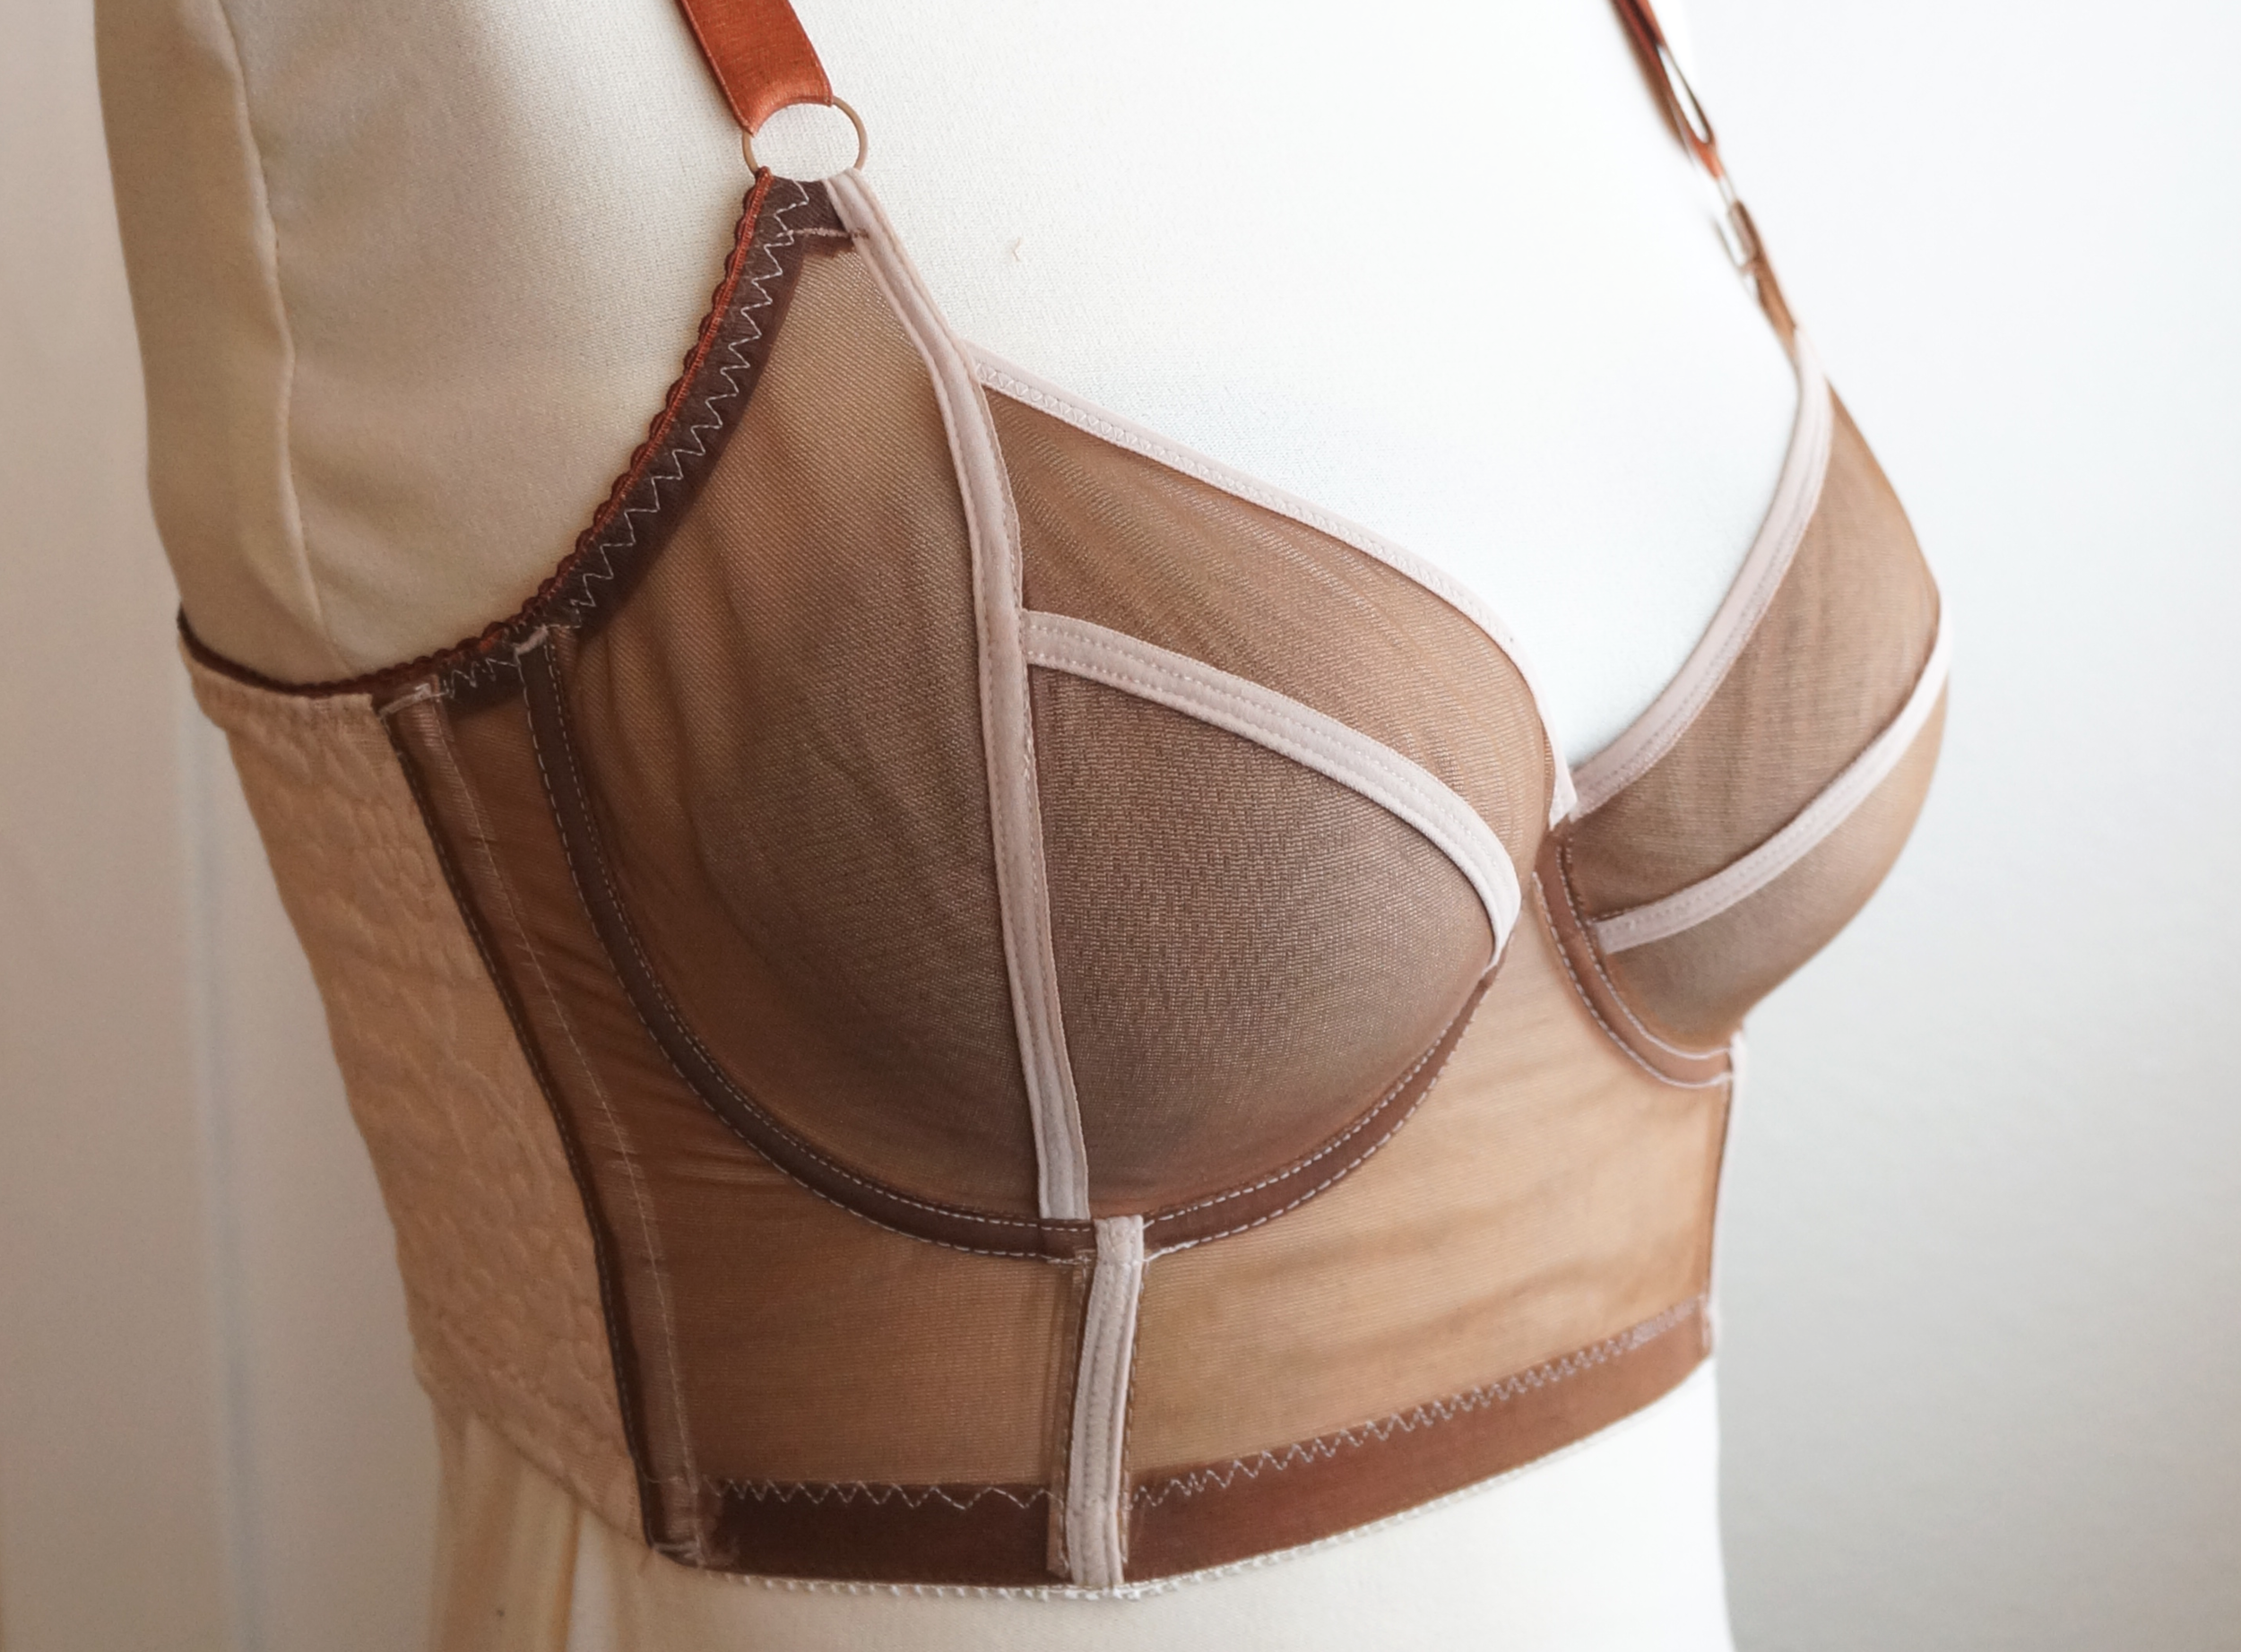 Fifty Shades of Chocolate - A Wearable Muslin — LilypaDesigns